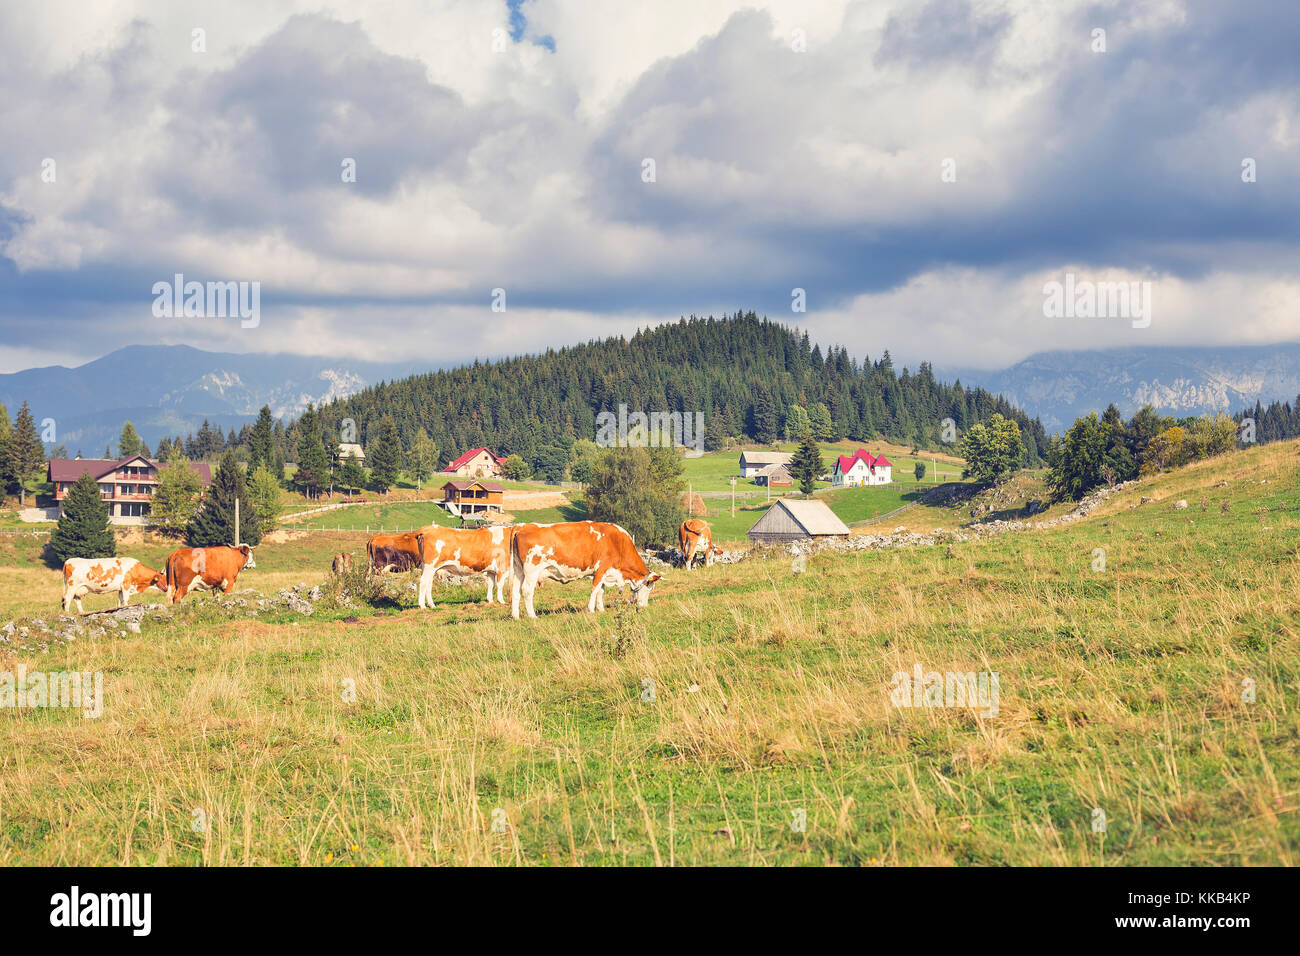 Cows grazing and old wood houses in romanian mountains Stock Photo